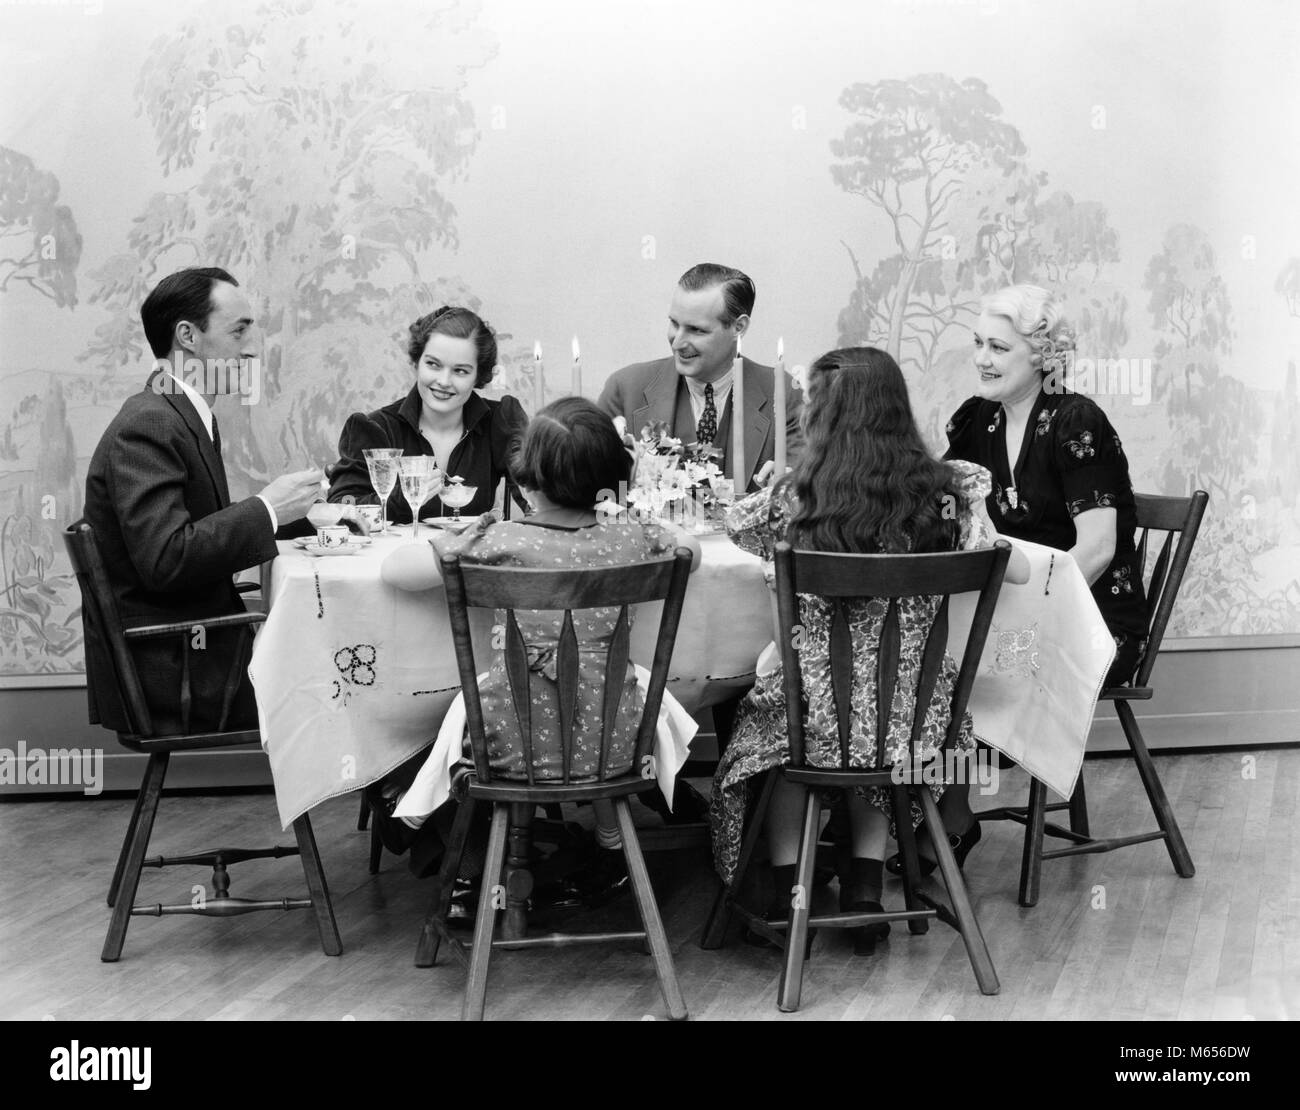 1930s THREE GENERATION FAMILY MEN WOMEN CHILDREN DINING AT TABLE TOGETHER BY CANDLELIGHT - d3095 HAR001 HARS OLD FASHION SISTER 1 JUVENILE WELCOME COMMUNICATION CAUCASIAN PLEASED JOY LIFESTYLE CELEBRATION FEMALES MARRIED STUDIO SHOT SPOUSE HUSBANDS HEALTHINESS HOME LIFE 6 COPY SPACE FRIENDSHIP FULL-LENGTH DAUGHTERS SIX COUPLES INDOORS SIBLINGS SISTERS NOSTALGIA FATHERS MIDDLE-AGED GATHERING TOGETHERNESS 10-12 YEARS 25-30 YEARS 30-35 YEARS 35-40 YEARS 50-55 YEARS 55-60 YEARS 7-9 YEARS WIVES HAPPINESS MIDDLE-AGED WOMAN CHEERFUL MOMS CANDLELIGHT DADS THREE GENERATION AUTHORITY SIBLING SMILES Stock Photo